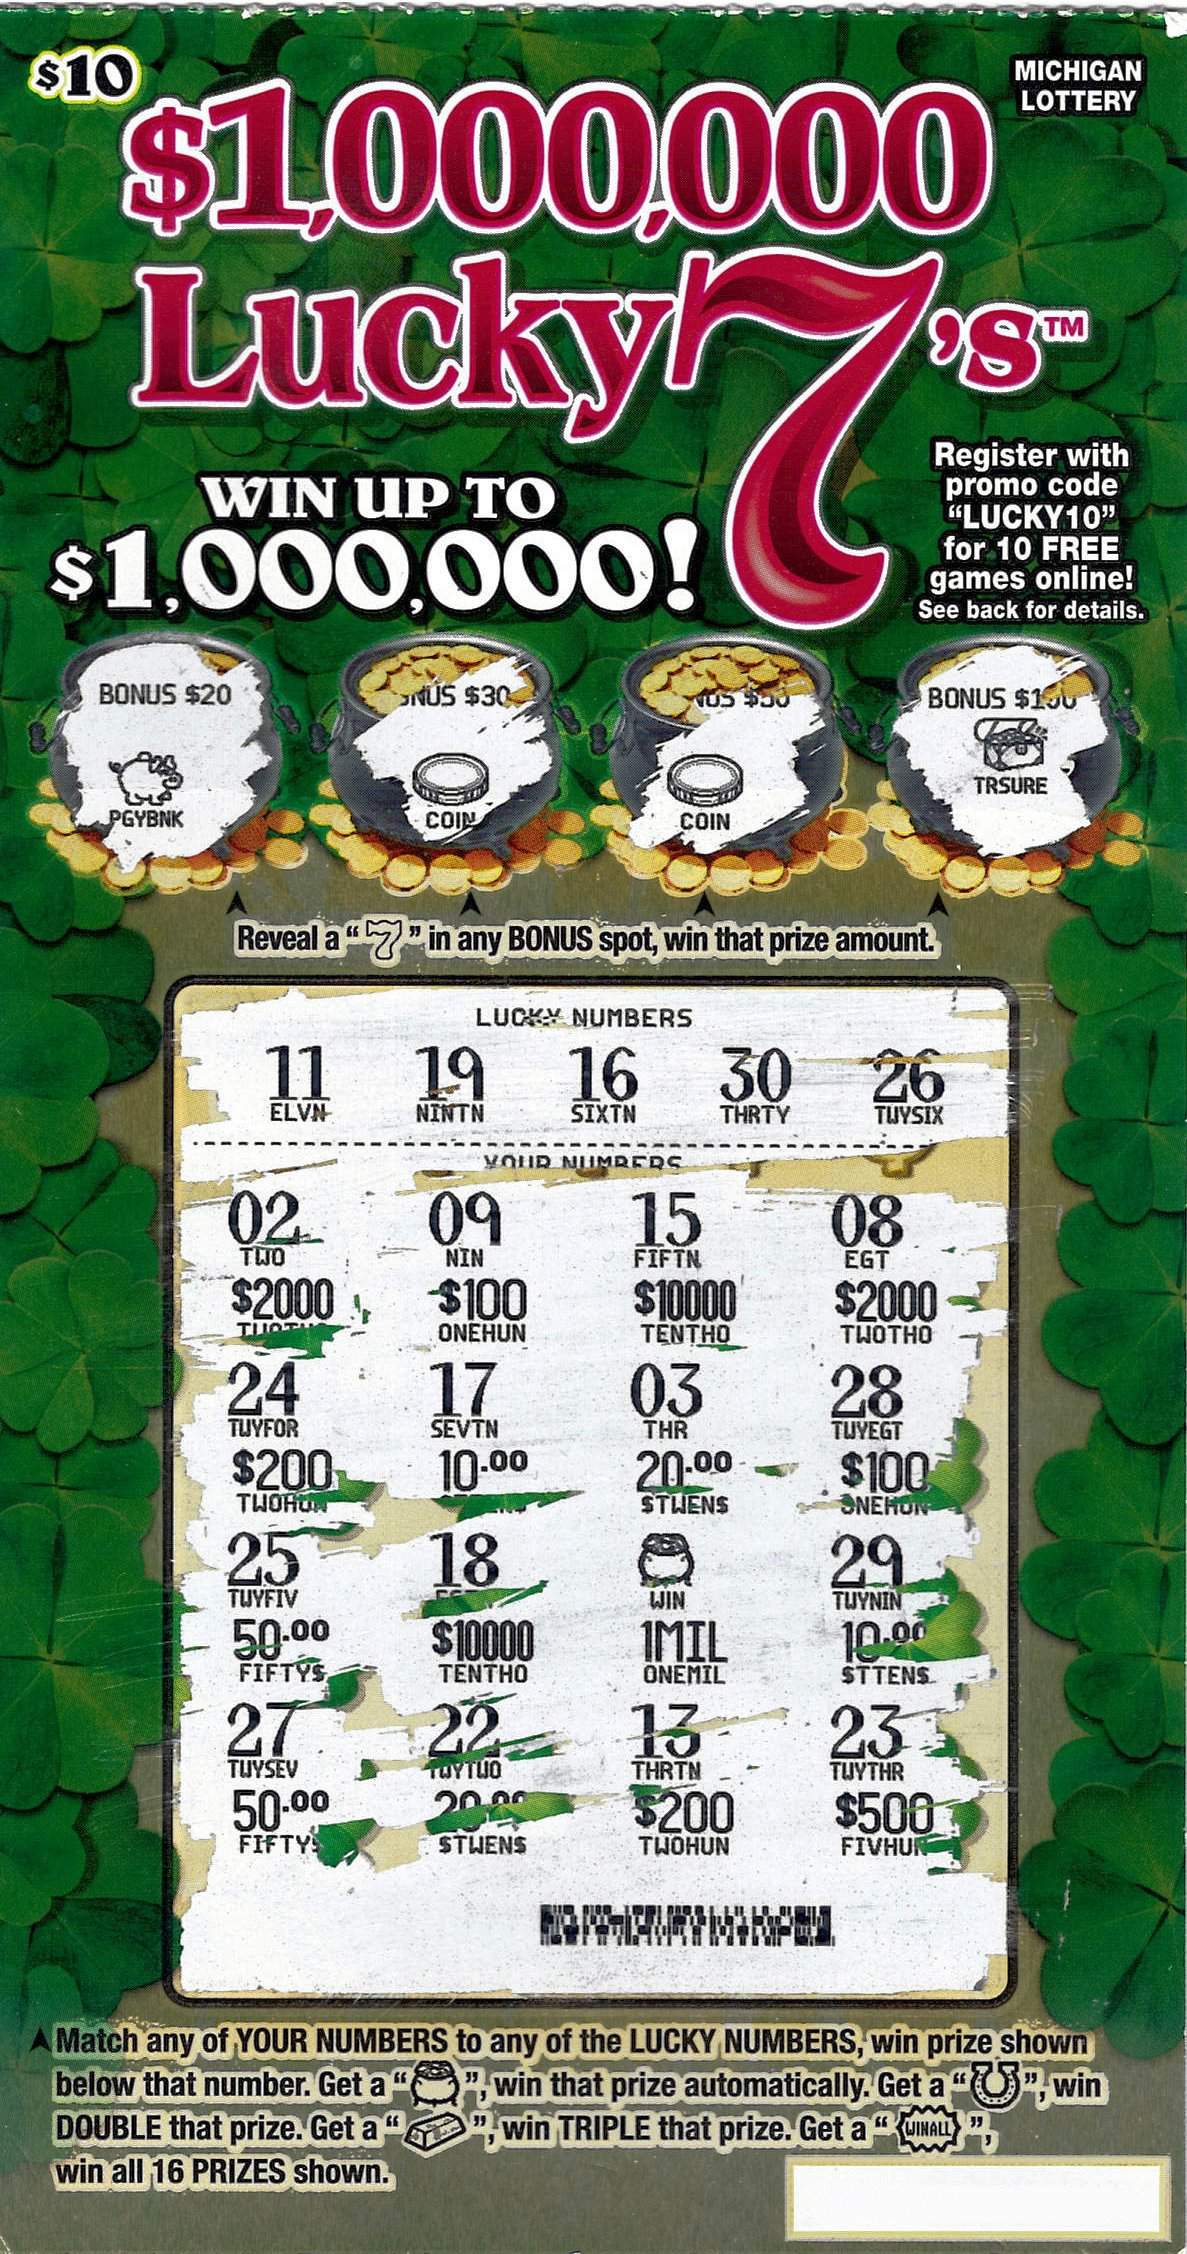 Michigan Lottery: Oakland County man wins $1M on scratch off after ‘rough couple of years’